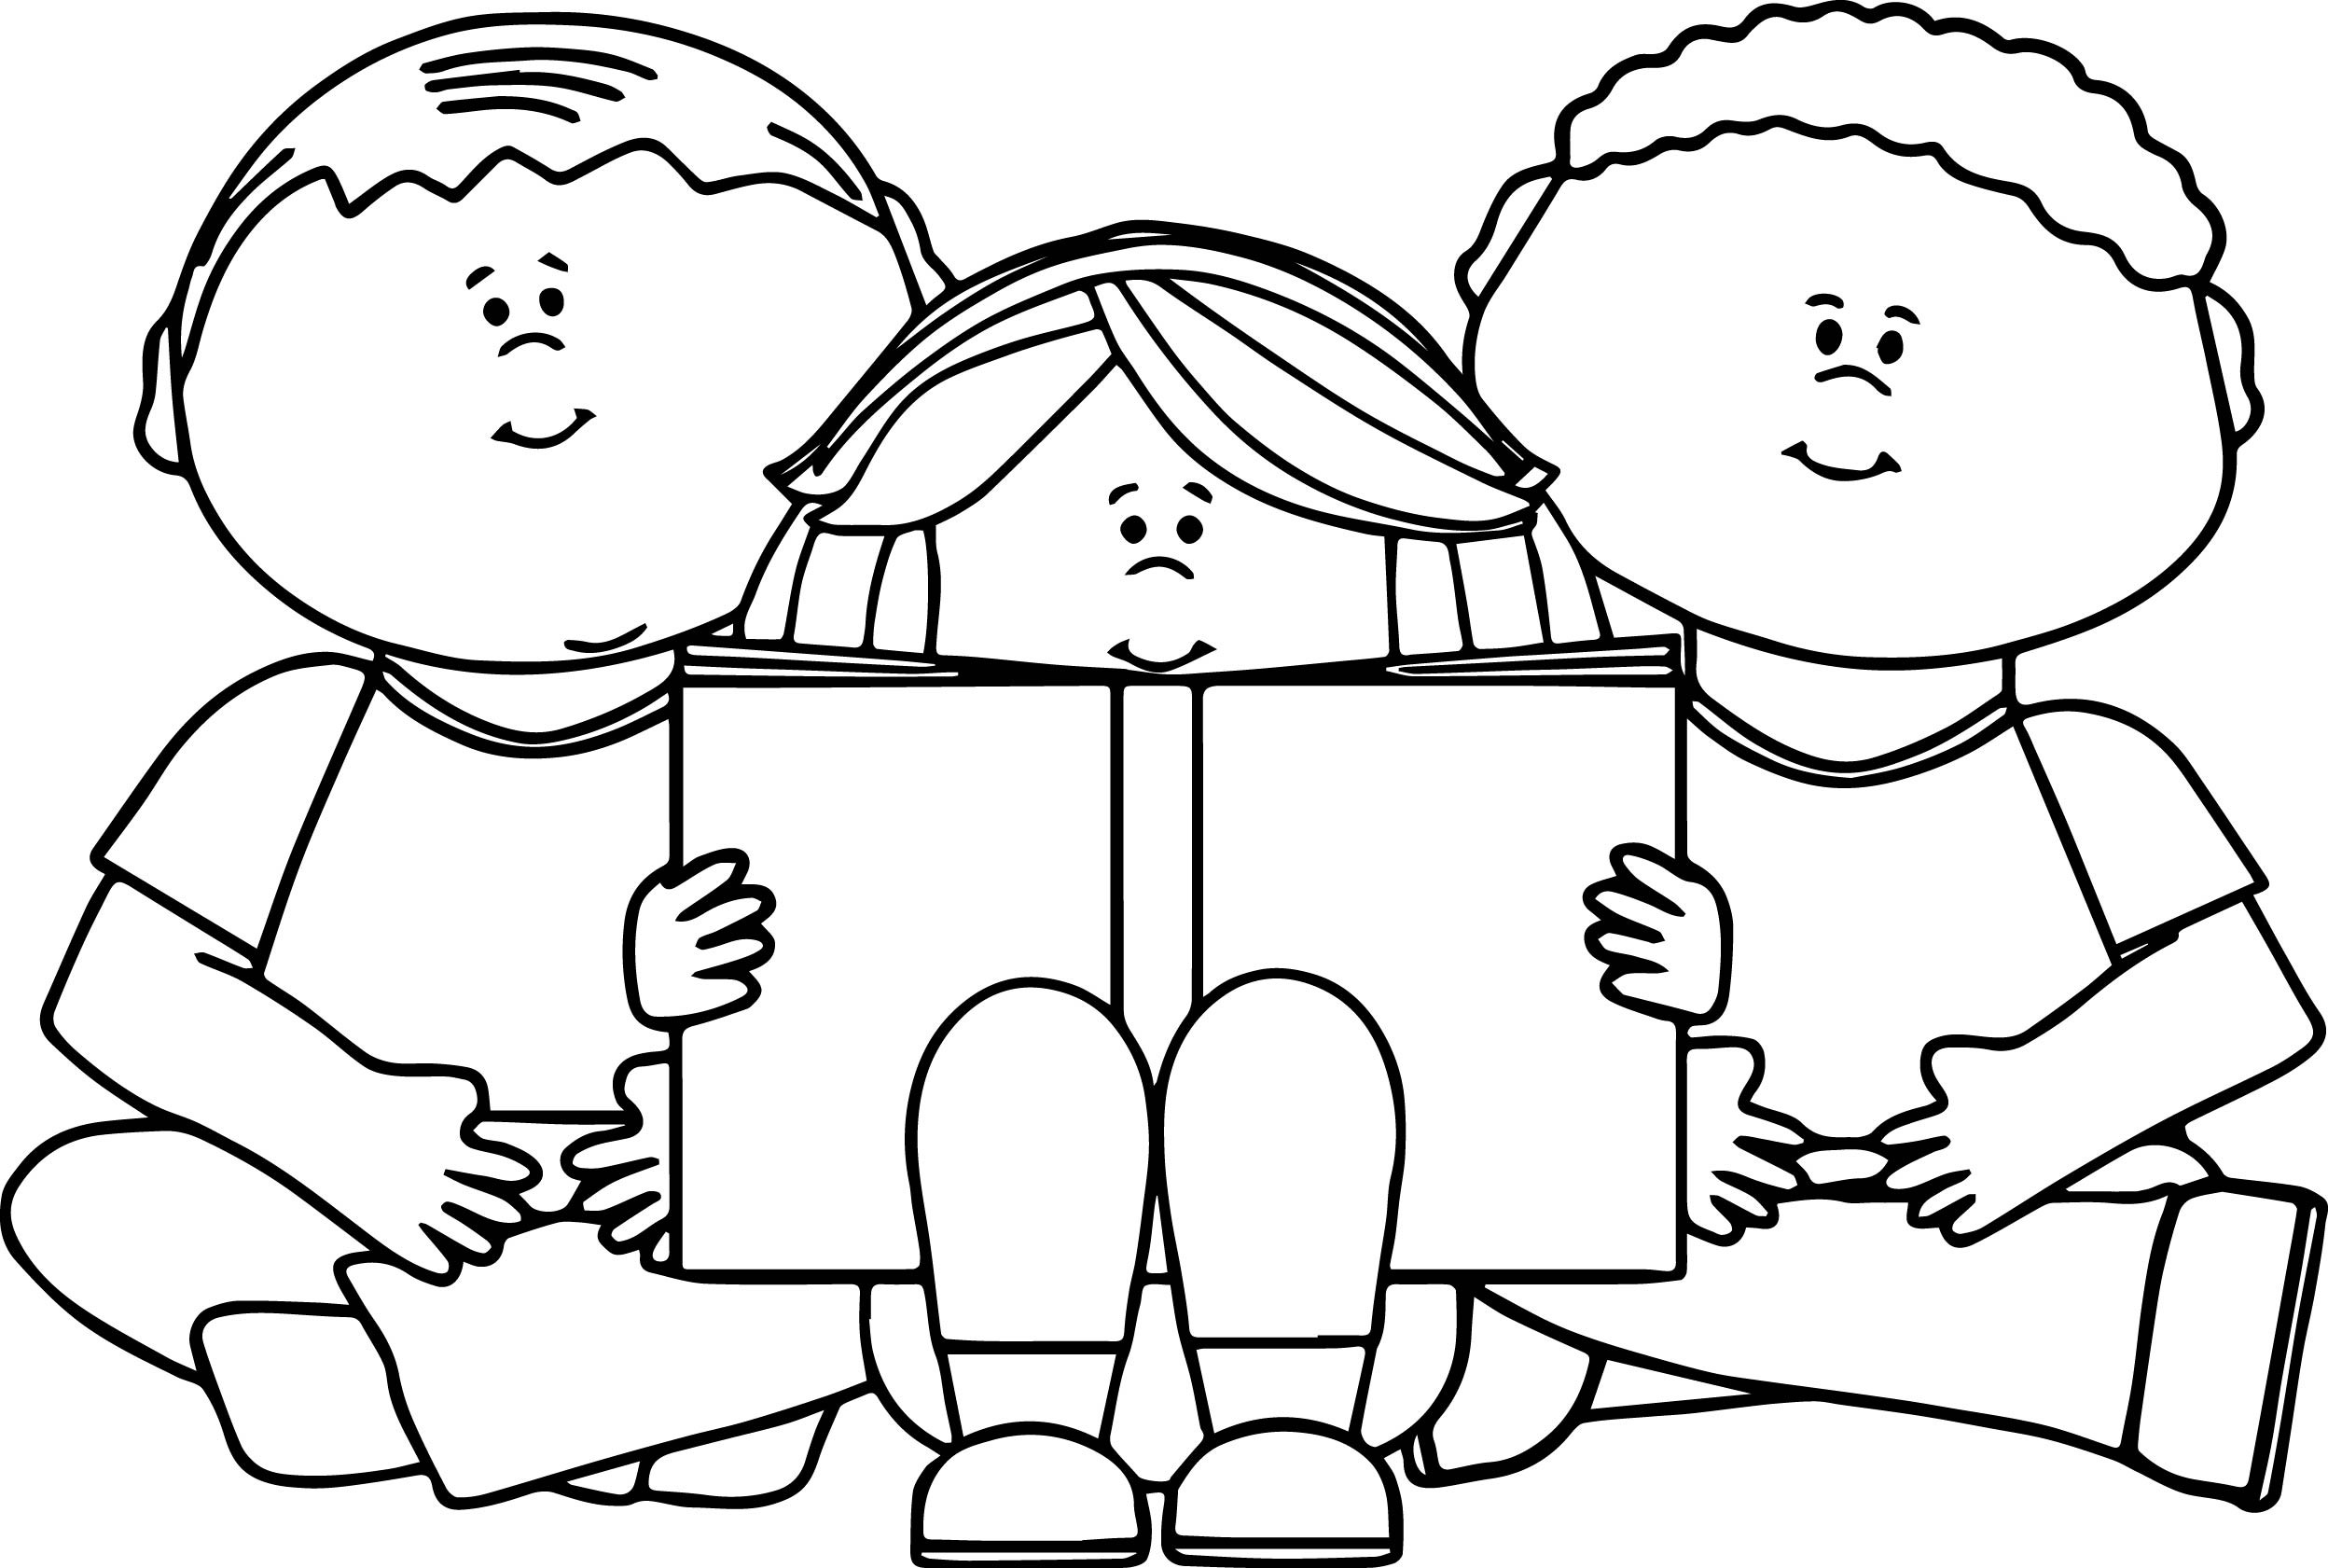 Boys Reading The Bible Coloring Pages
 Books Coloring Pages Best Coloring Pages For Kids